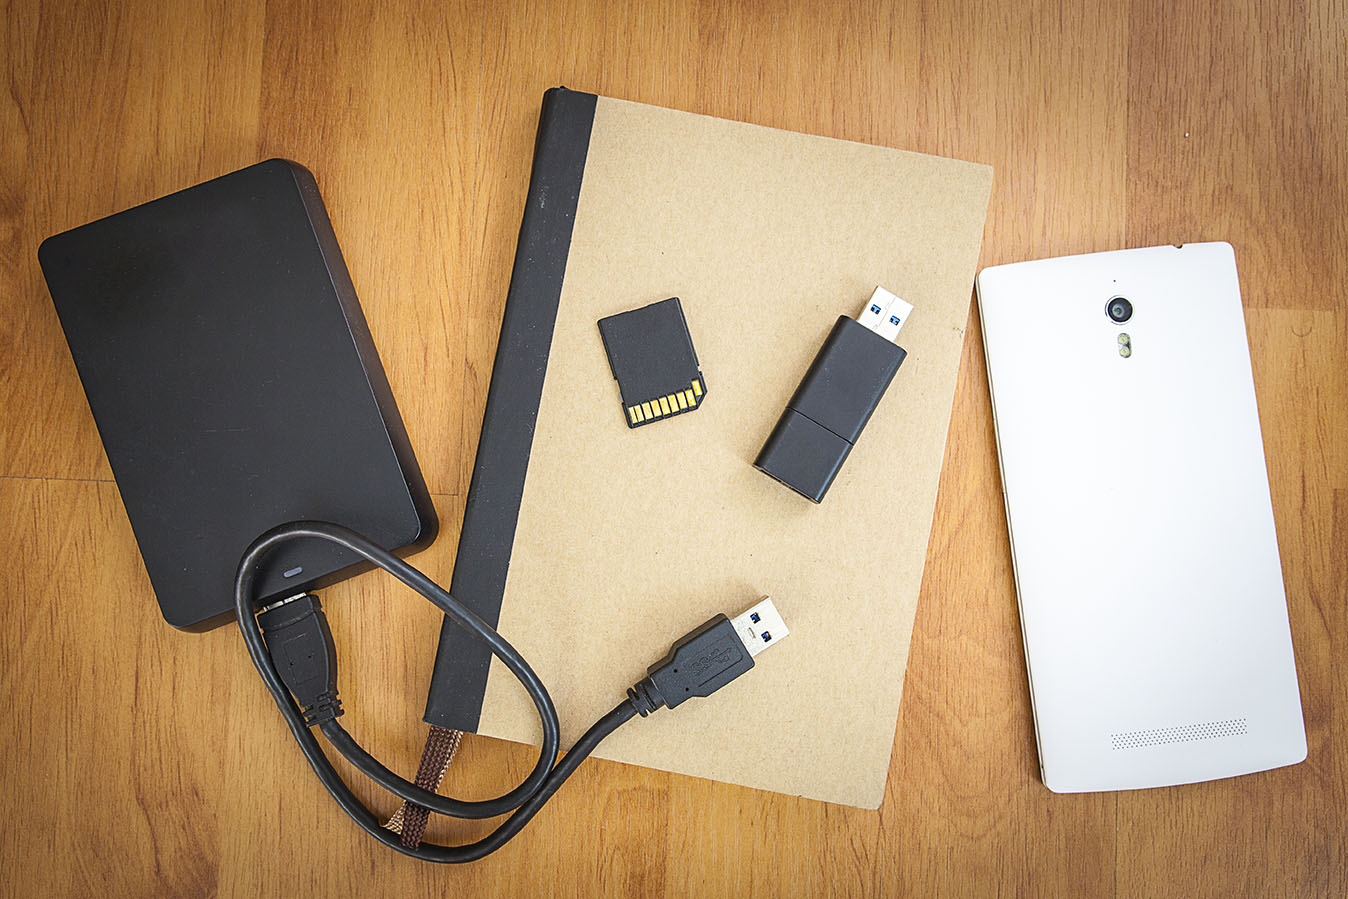 External Hard Drive Is a Better Option than These Other Devices